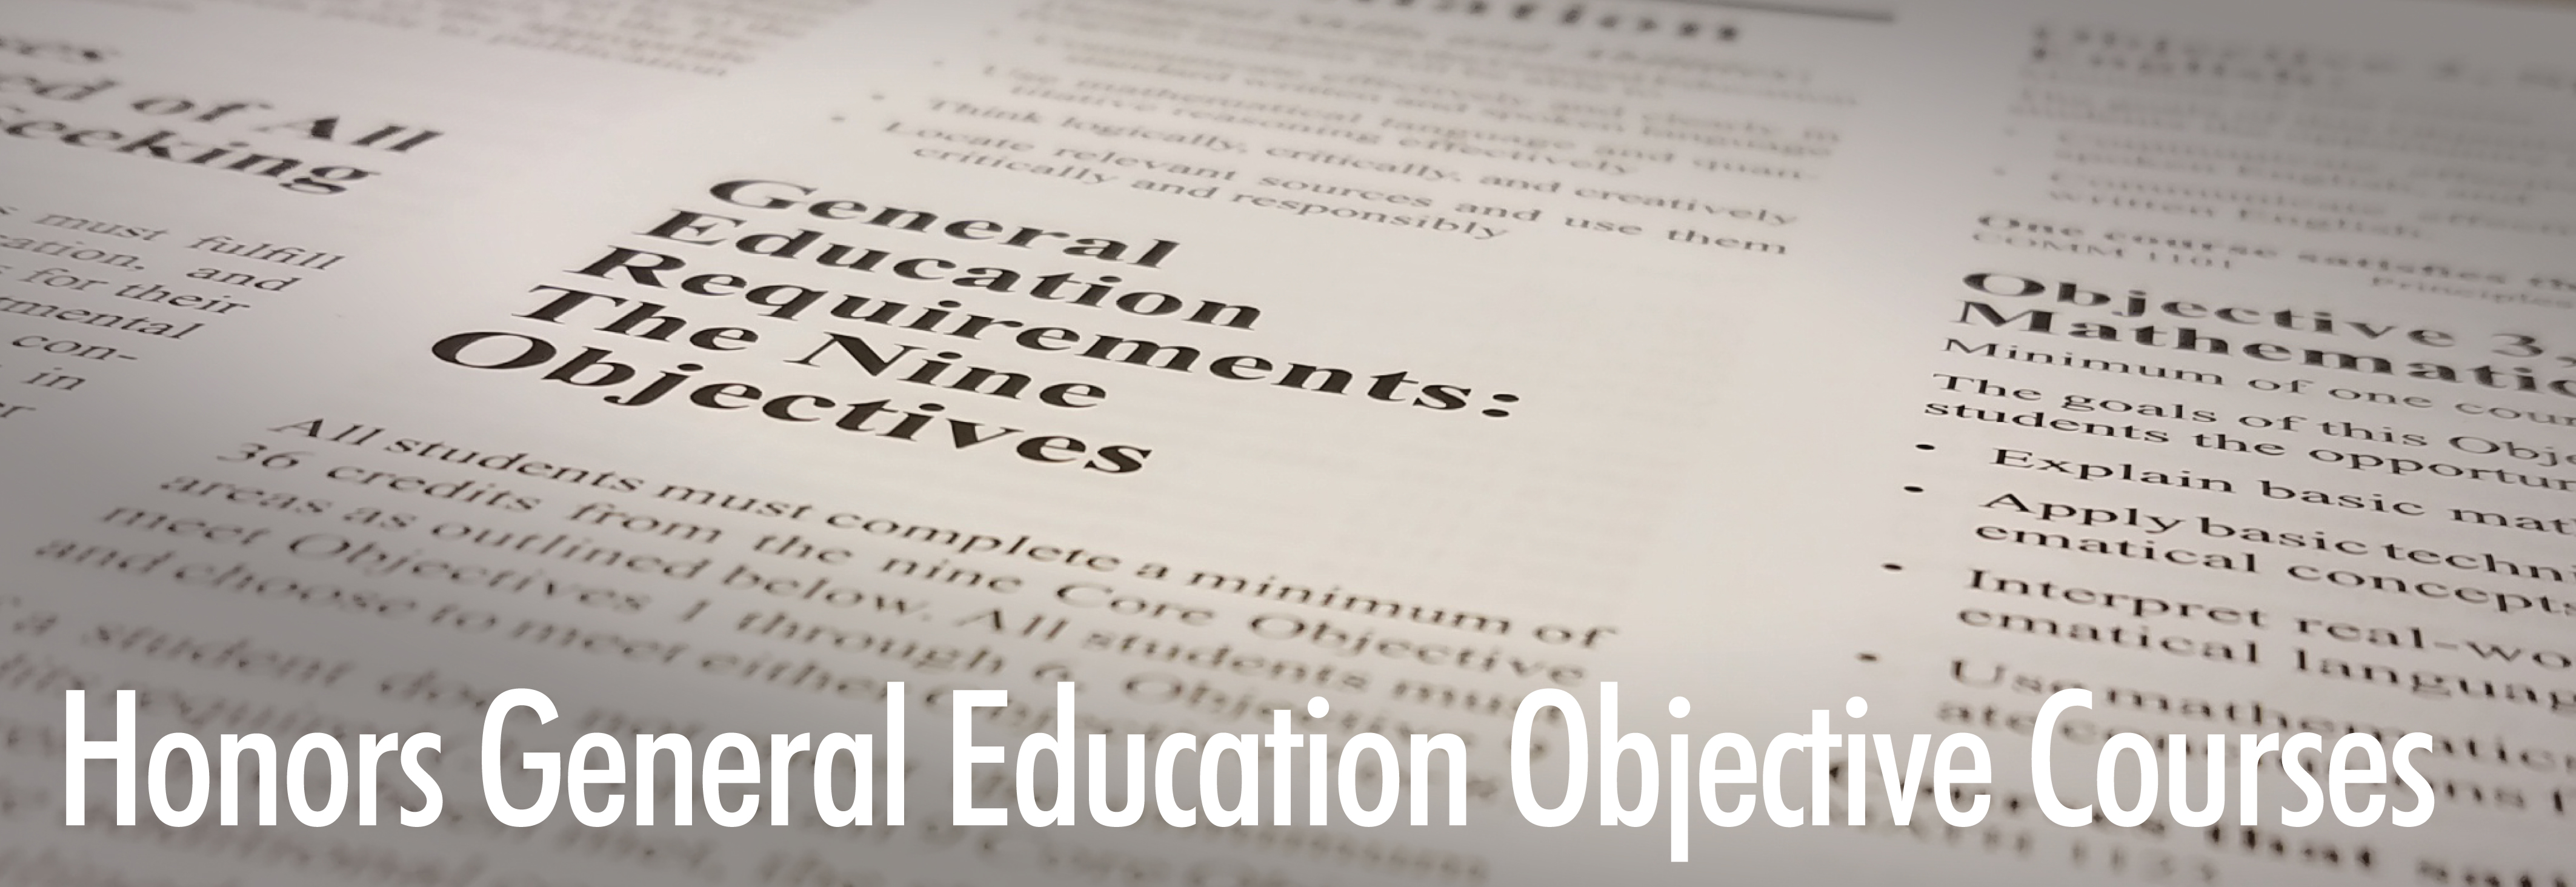 Honors General Education Objective Courses